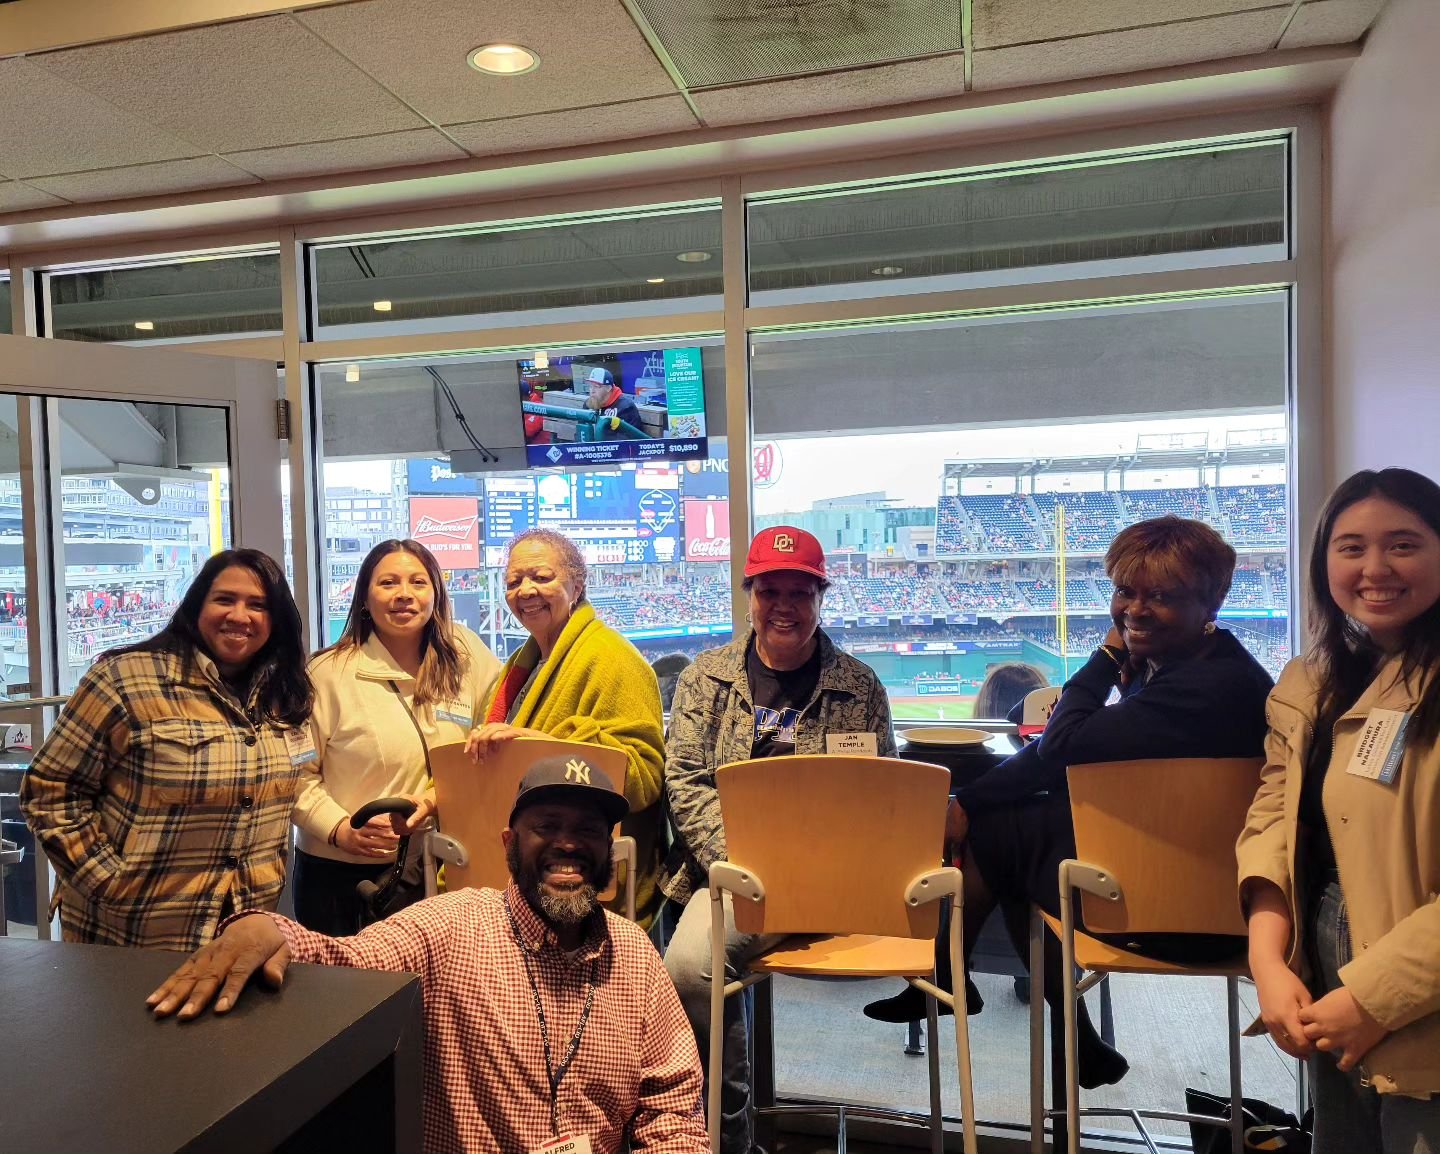 It's always so nice to share with our hermanos y hermanas from @aprinational #gameday #natitude #union #unionstrong #thursday @dodgers @nationals #washingtondc